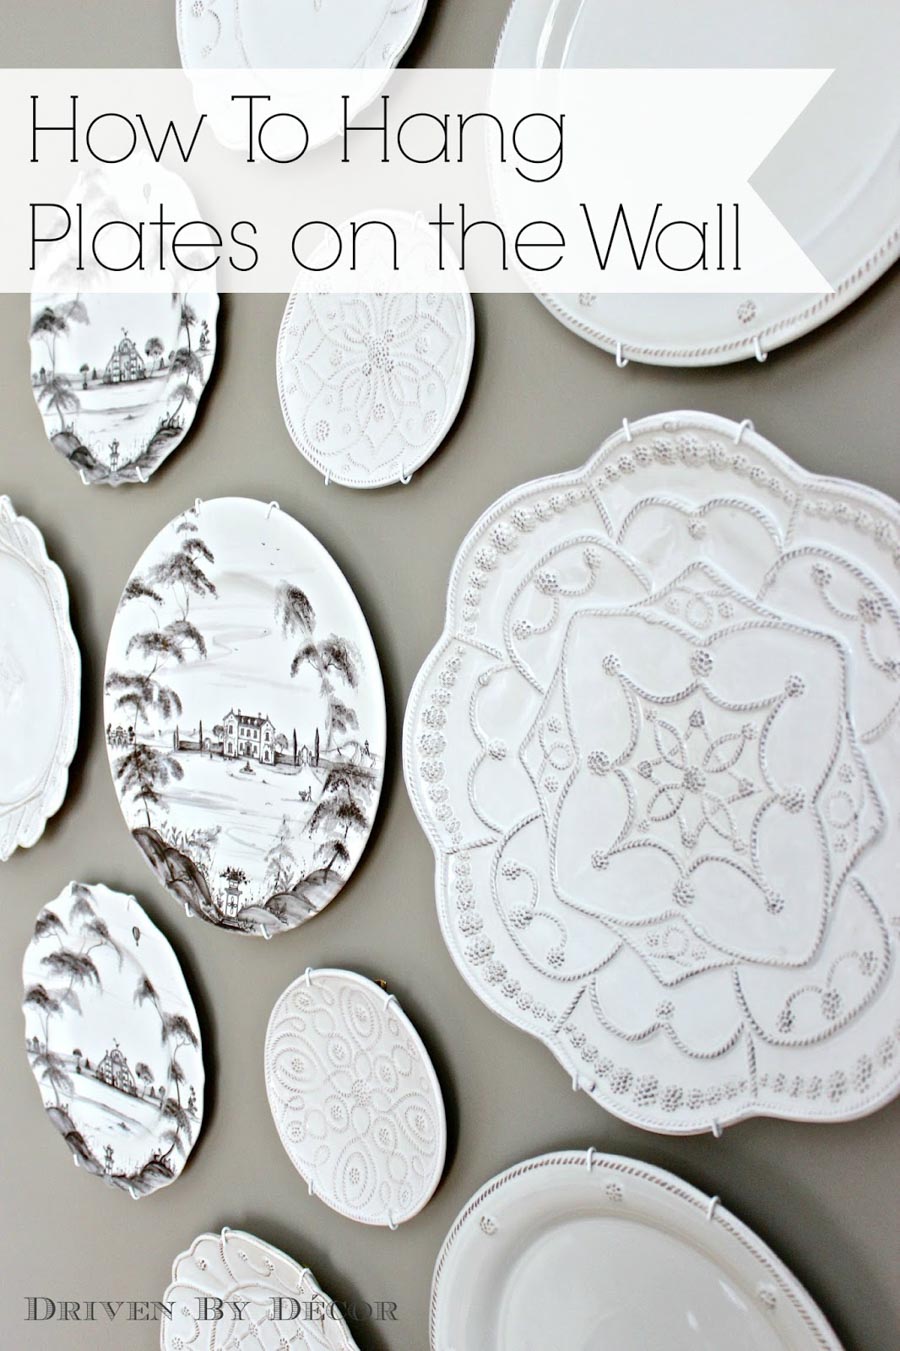 How To Hang Plates On The Wall The Best Hangers More Driven By Decor